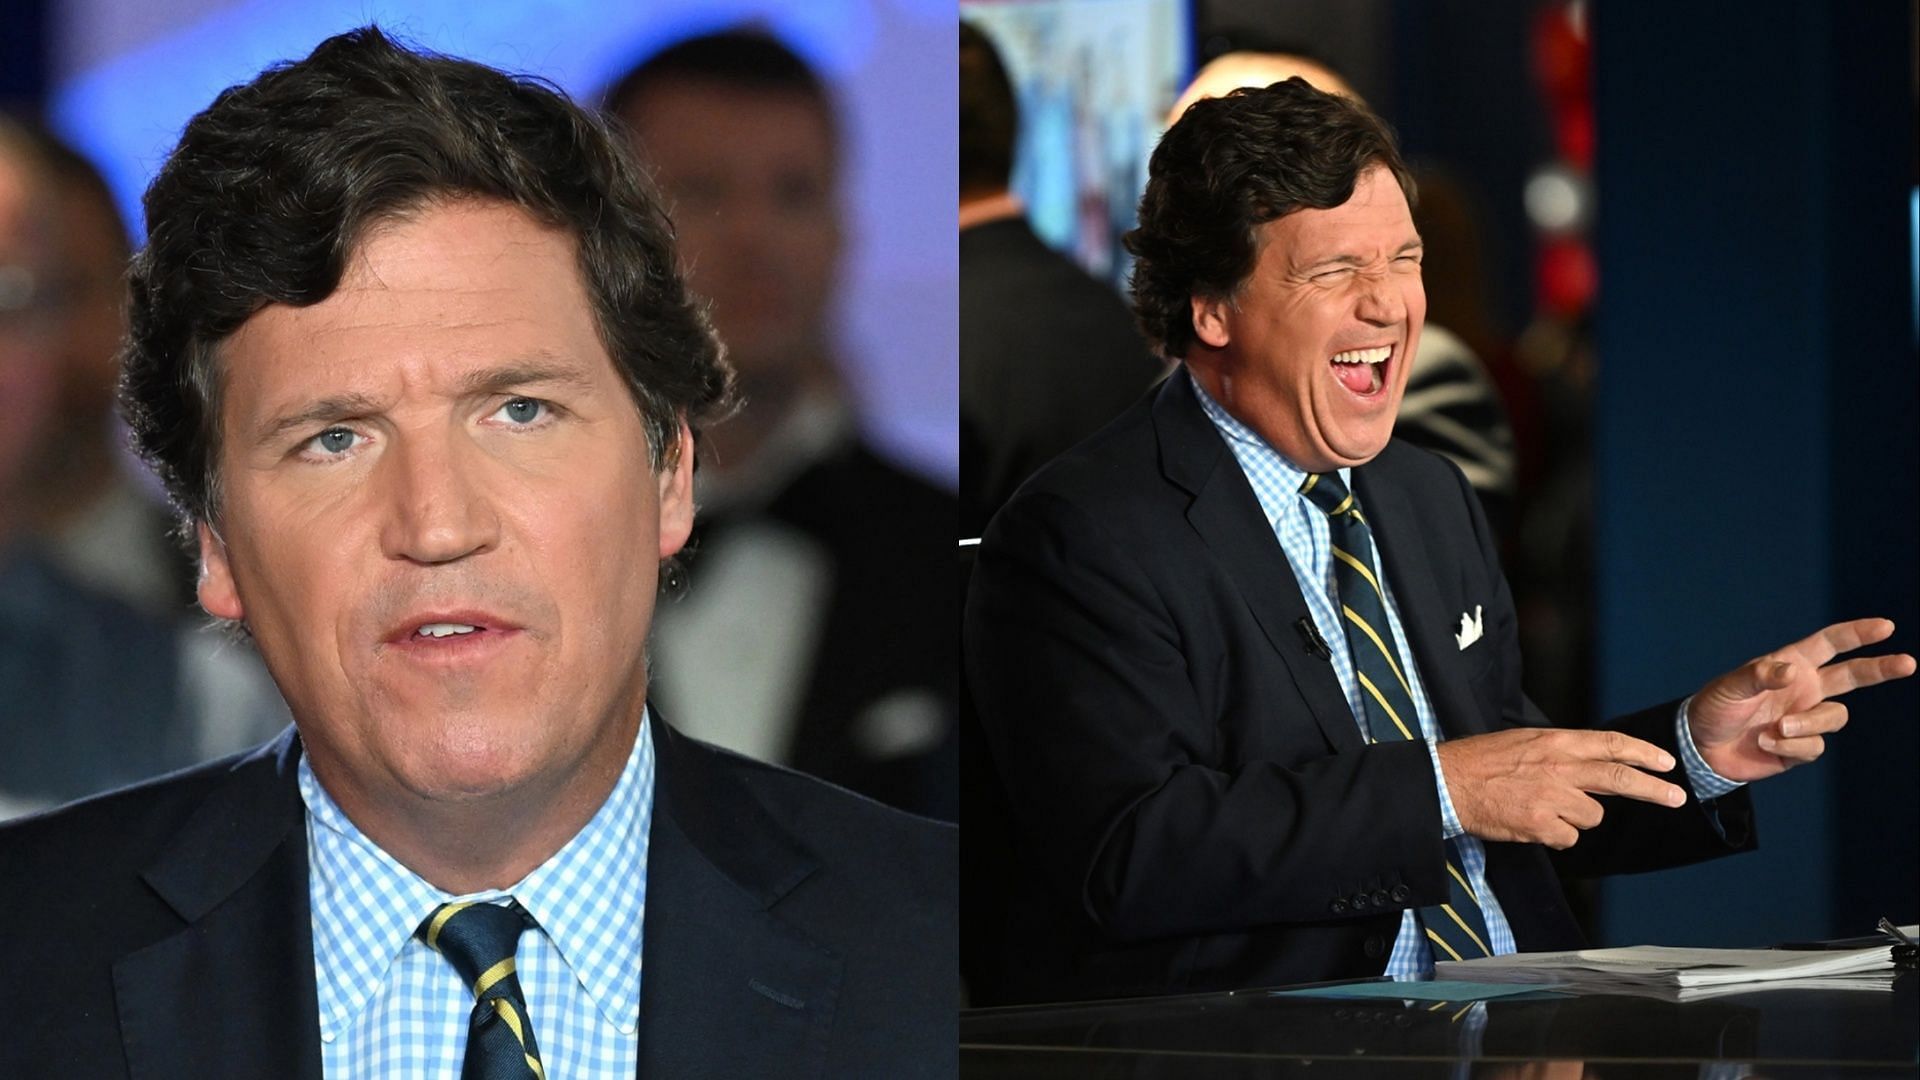 Edited CNN article headline about Tucker Carlson has been debunked. (Image via Getty Images)